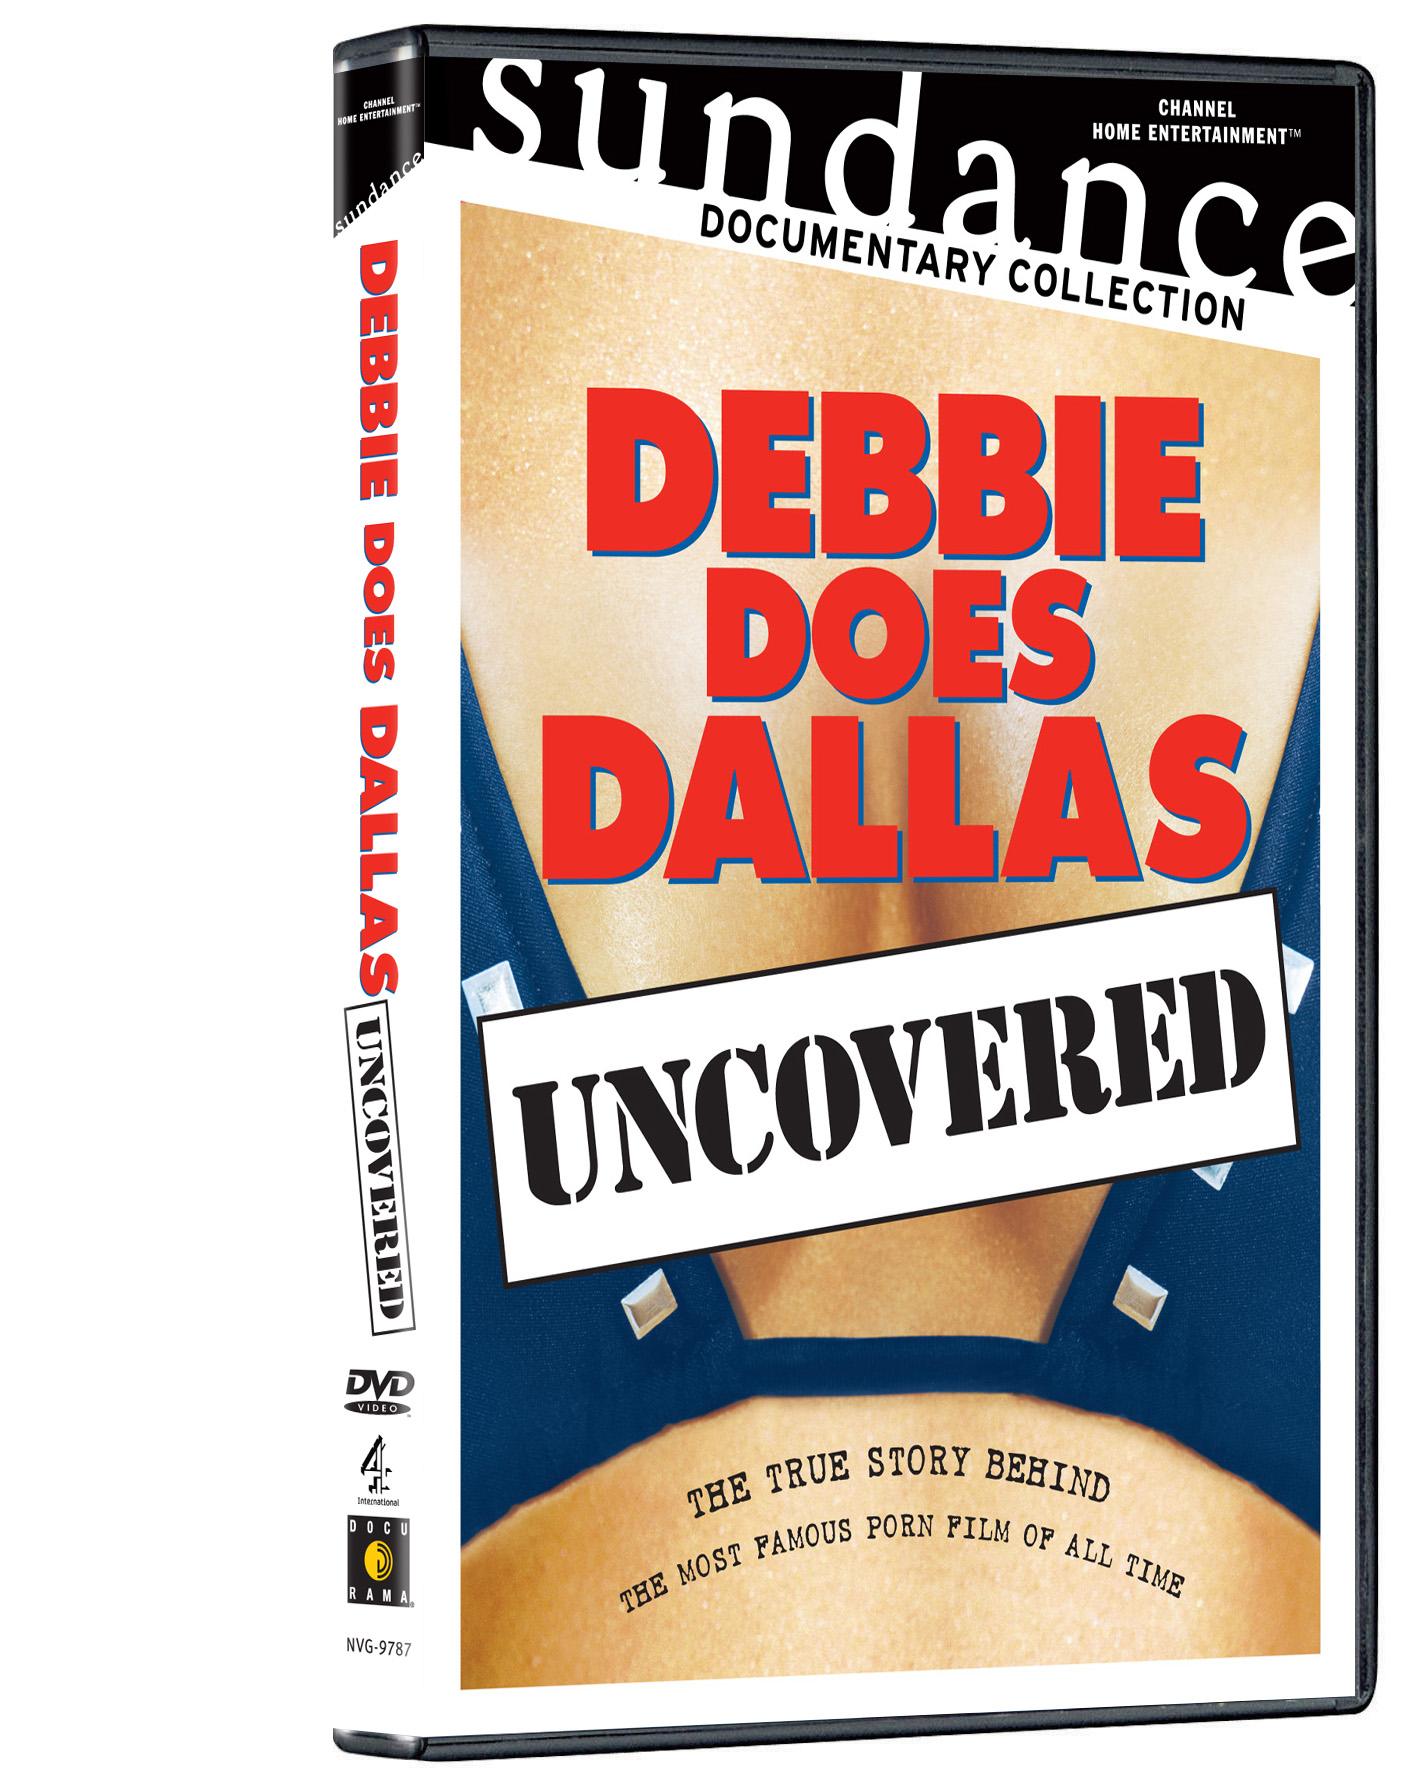 2. Debbie Does Dallas Uncovered (2005)